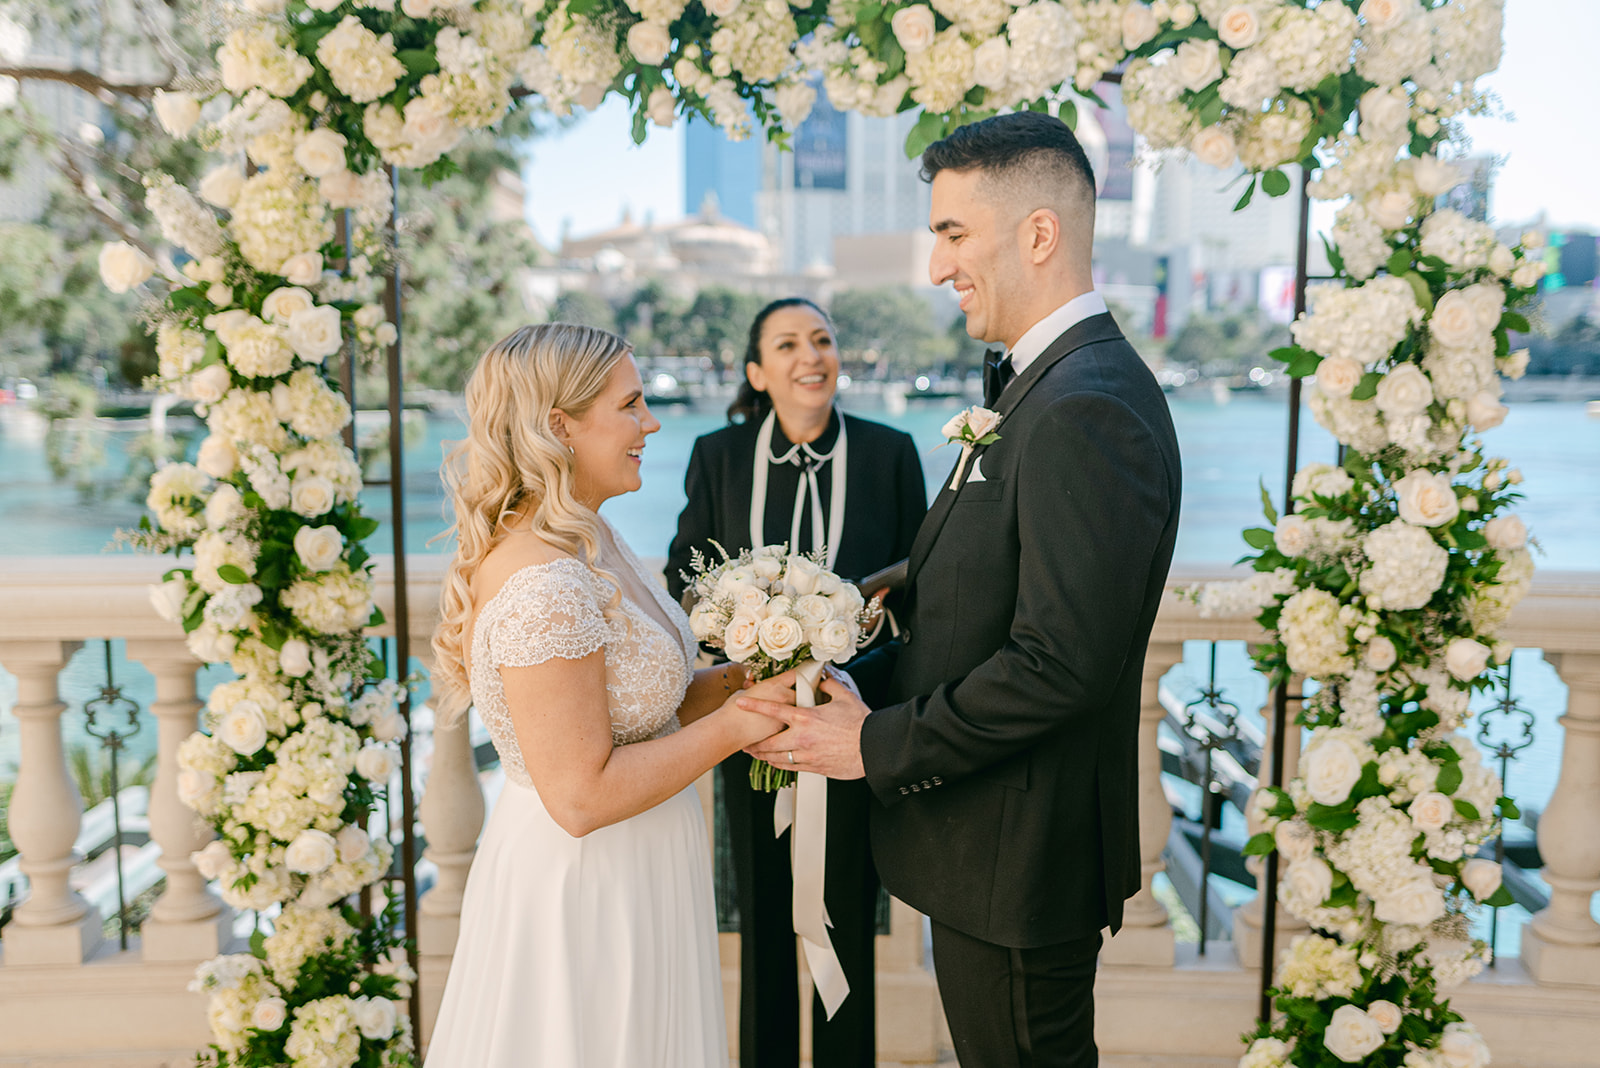 Bride and groom smiling at each other as they stand in front of an officiant during their wedding arranged by Elopement Las Vegas